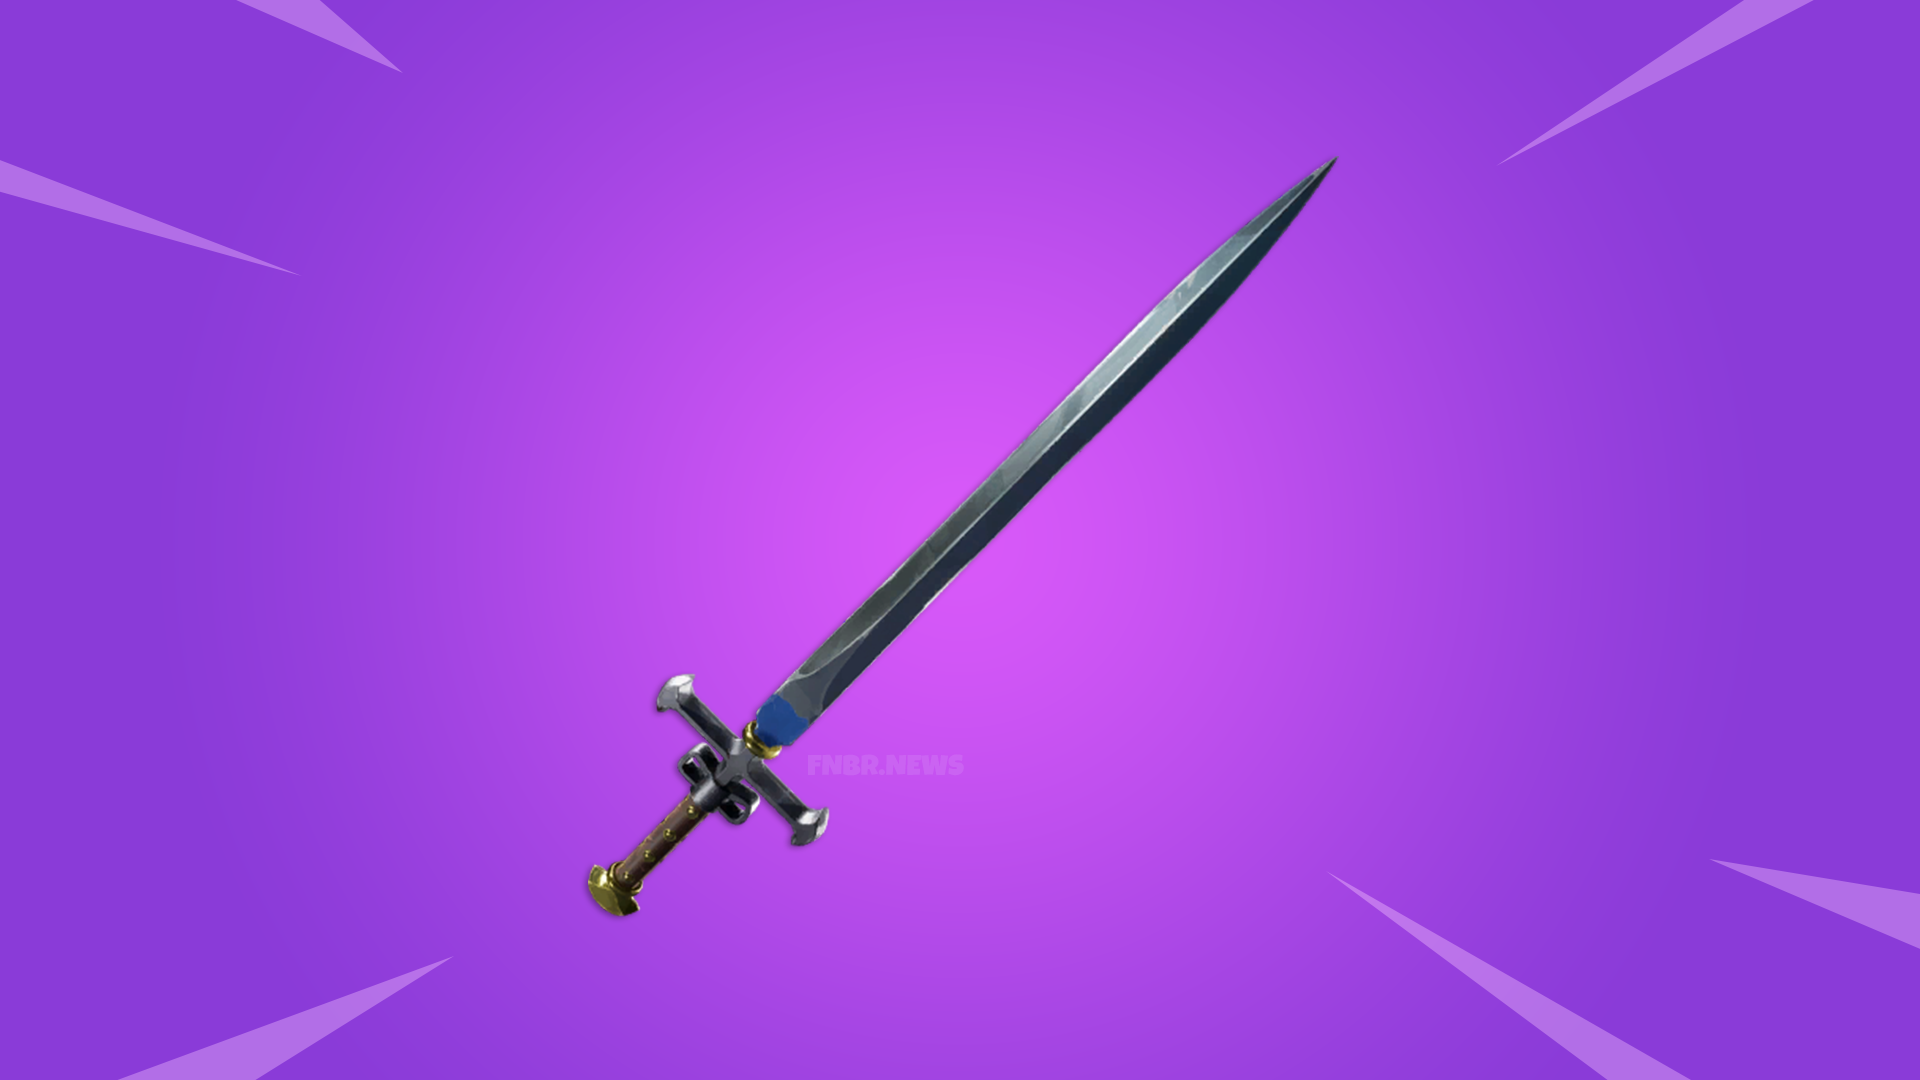 Leak: Medieval Sword Weapon Coming to Fortnite